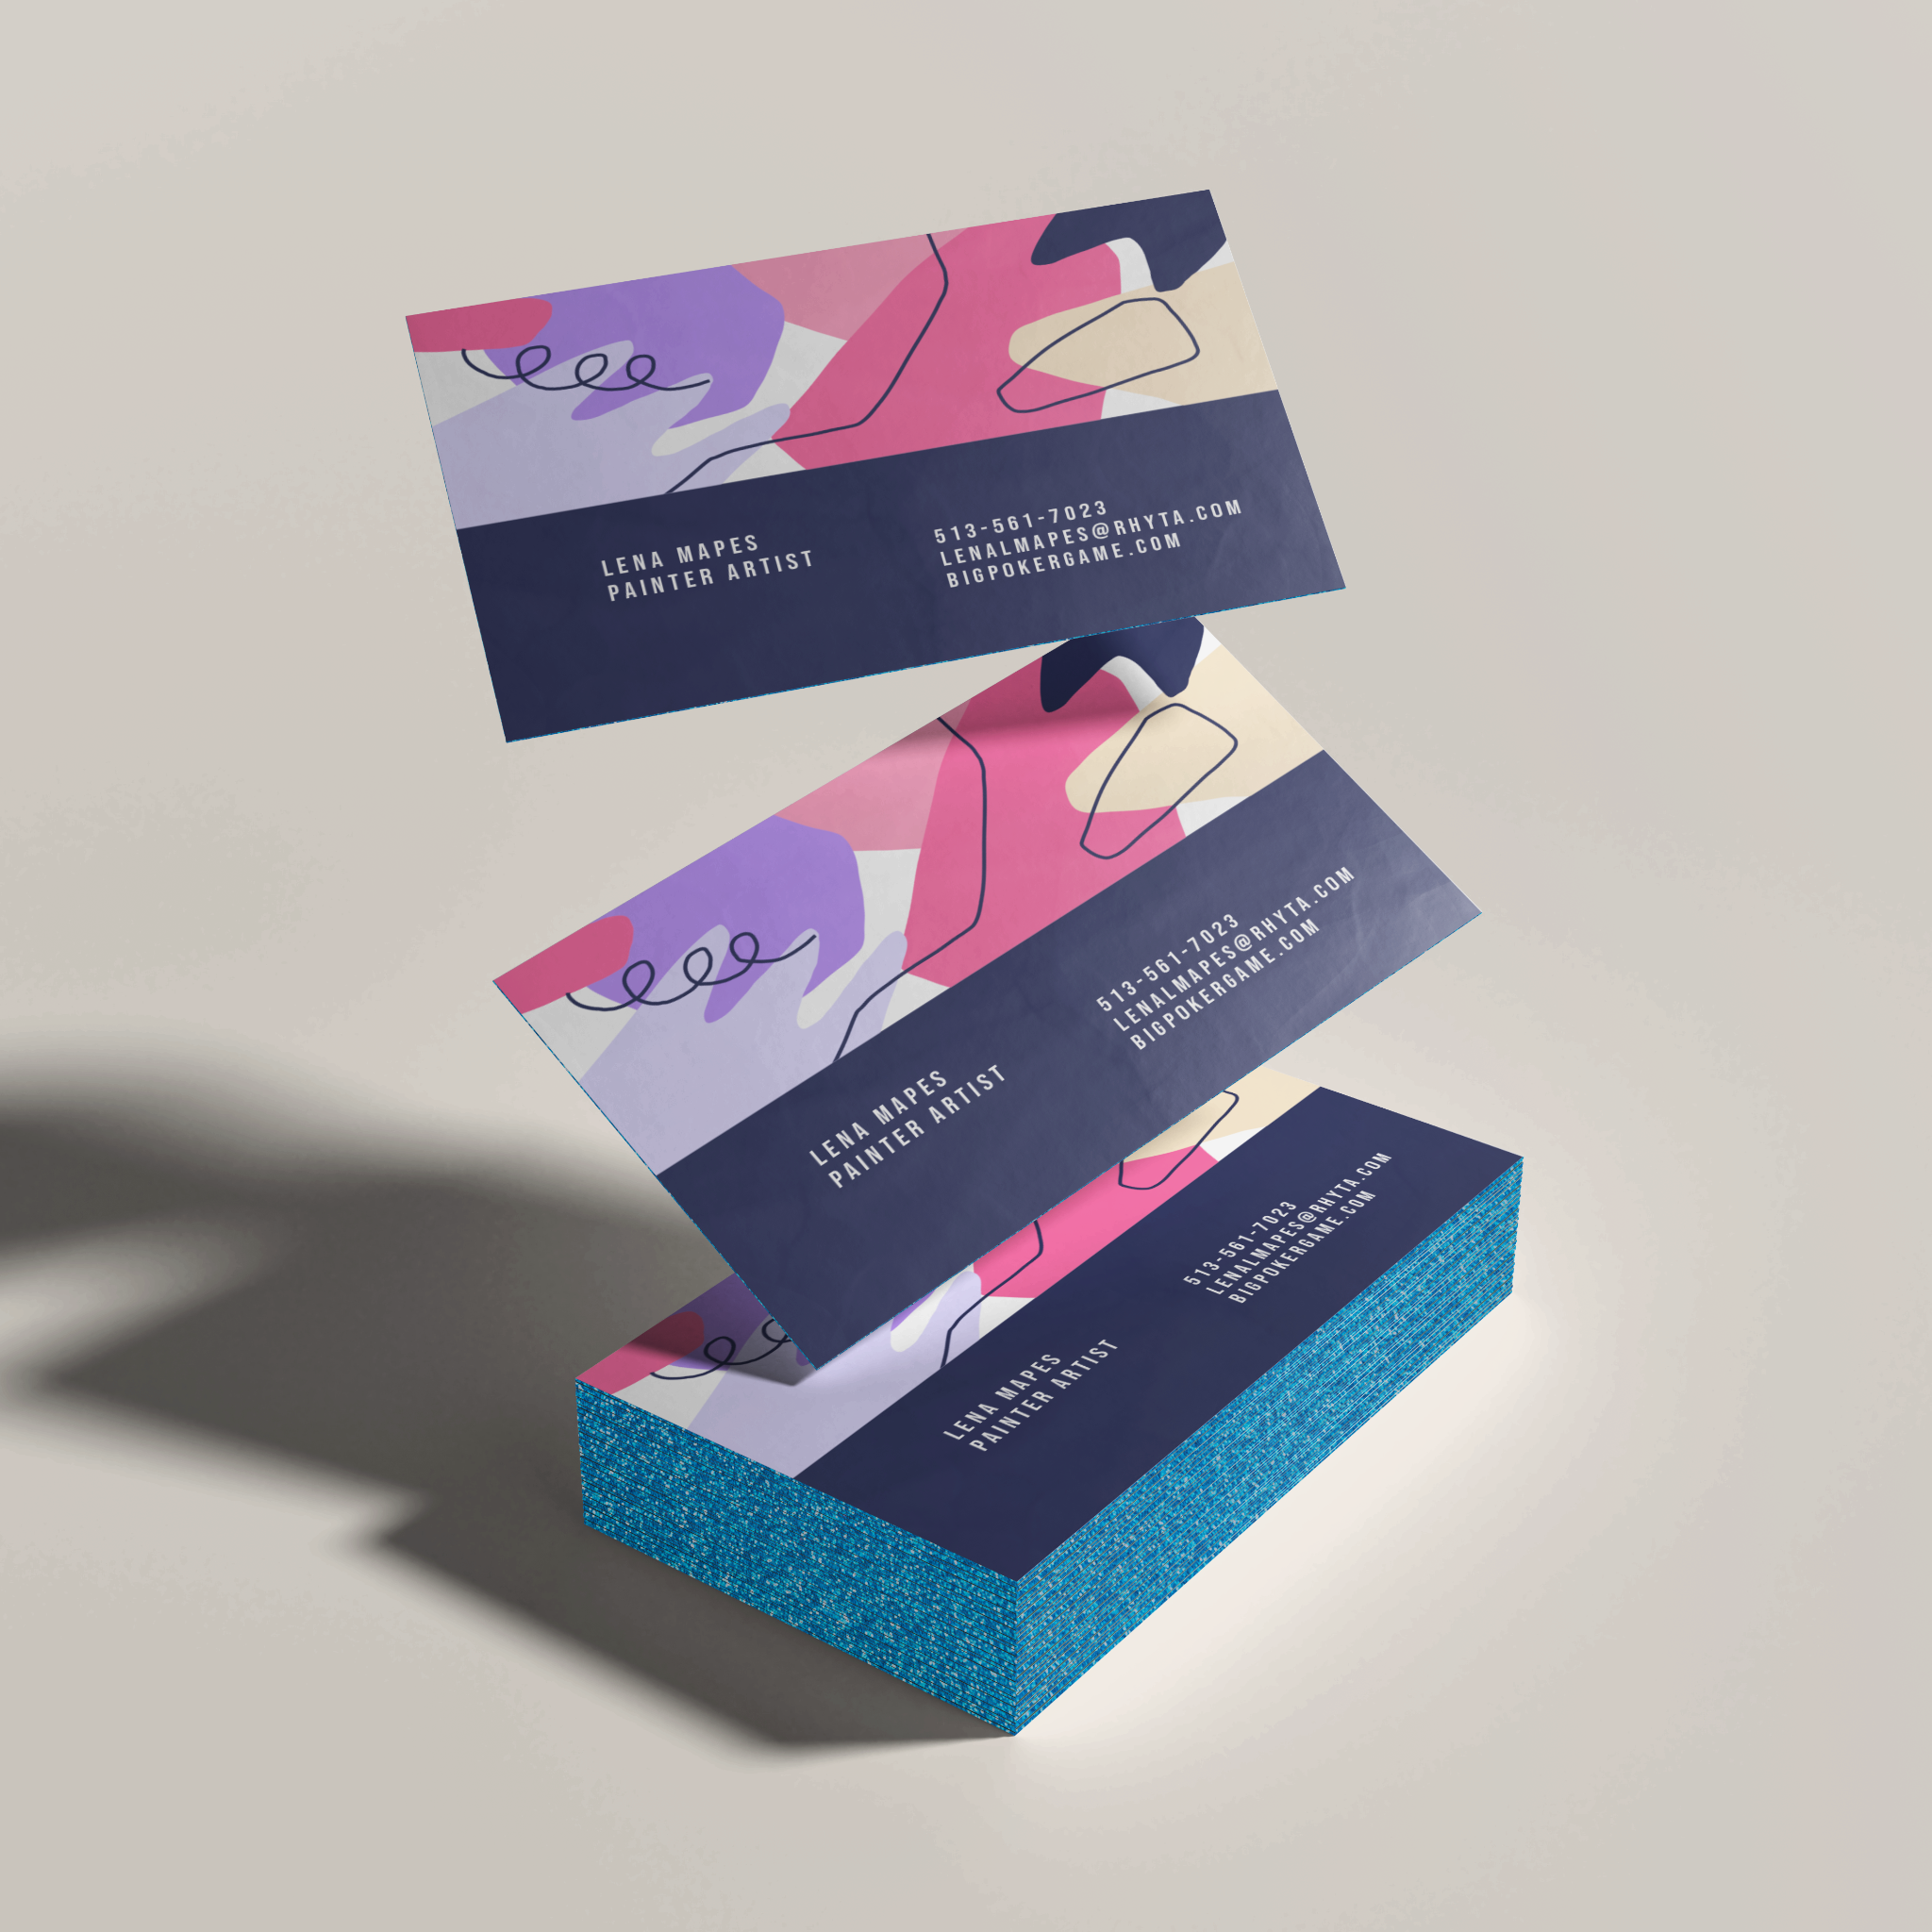 Metallic blue painted edge business cards 